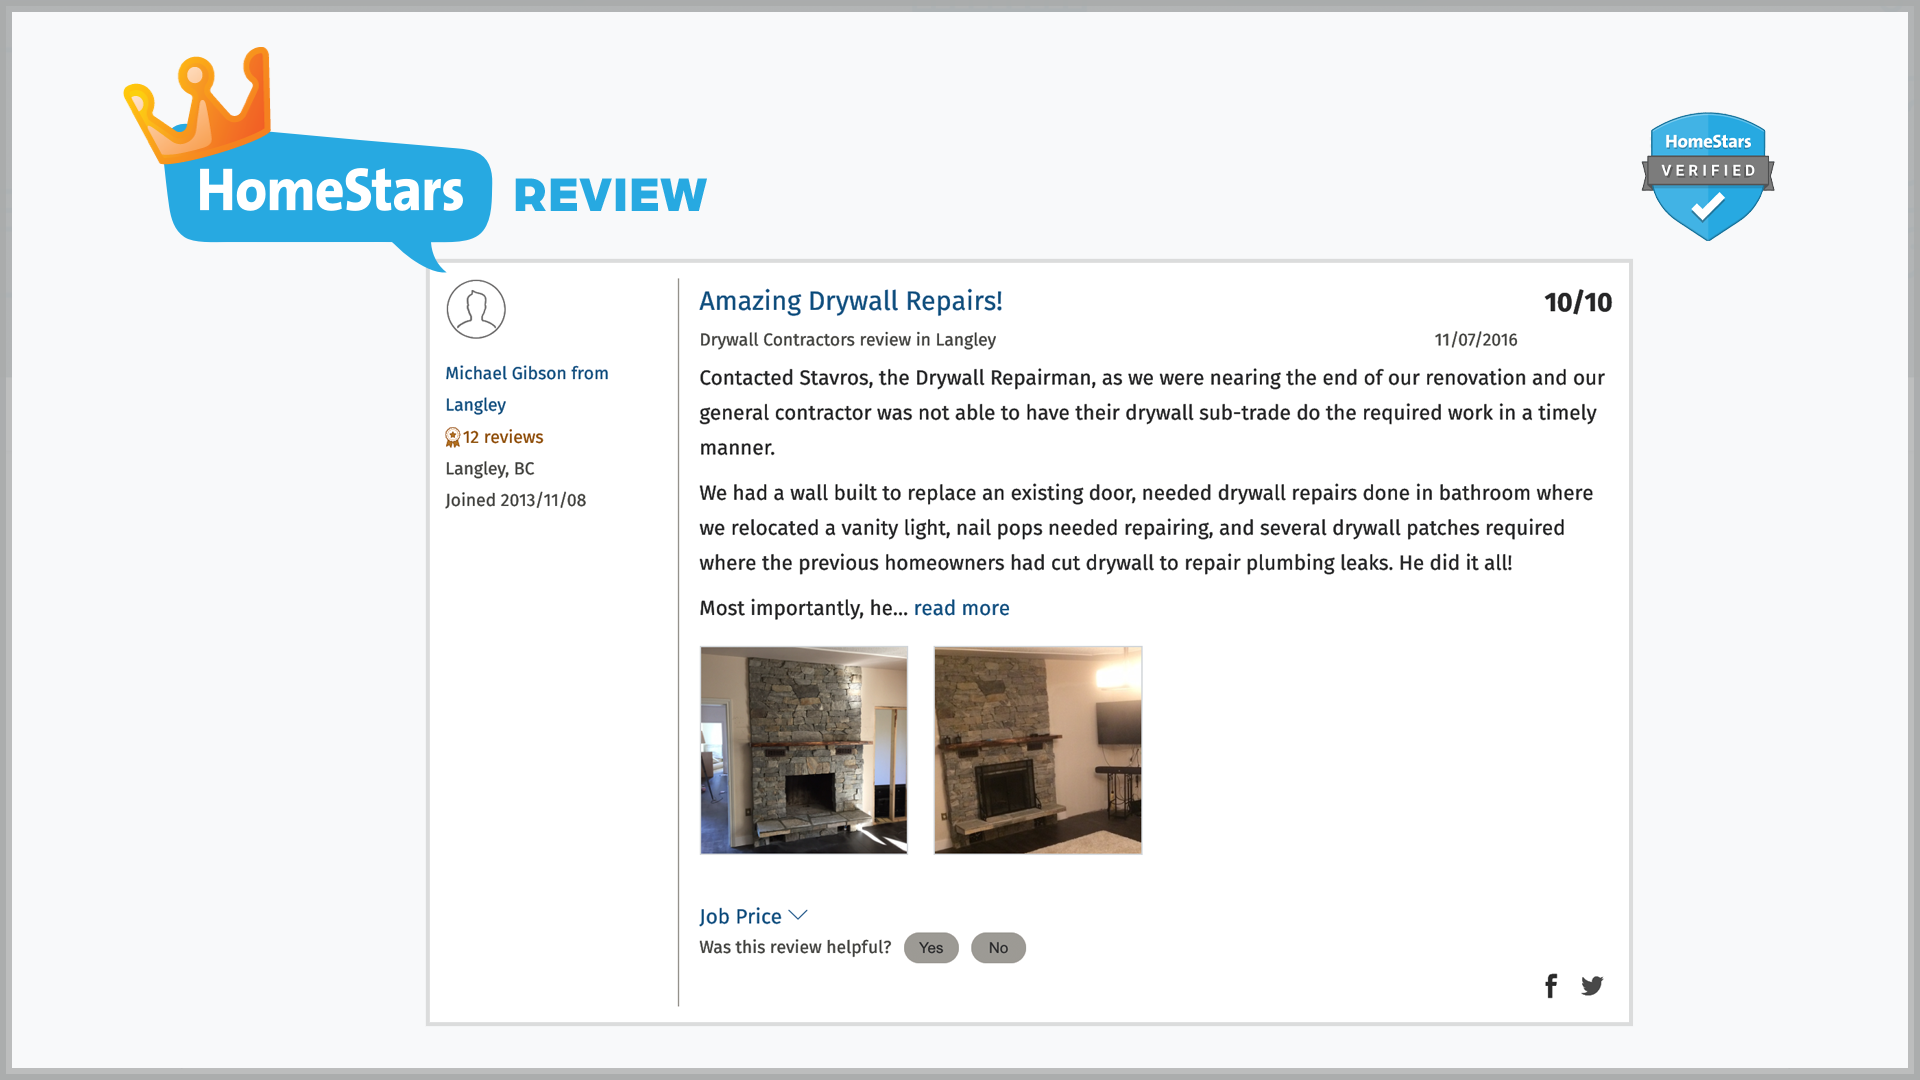 homestars-review-10-out-of-10-drywall-repairman-vancouver-bc-canada-16